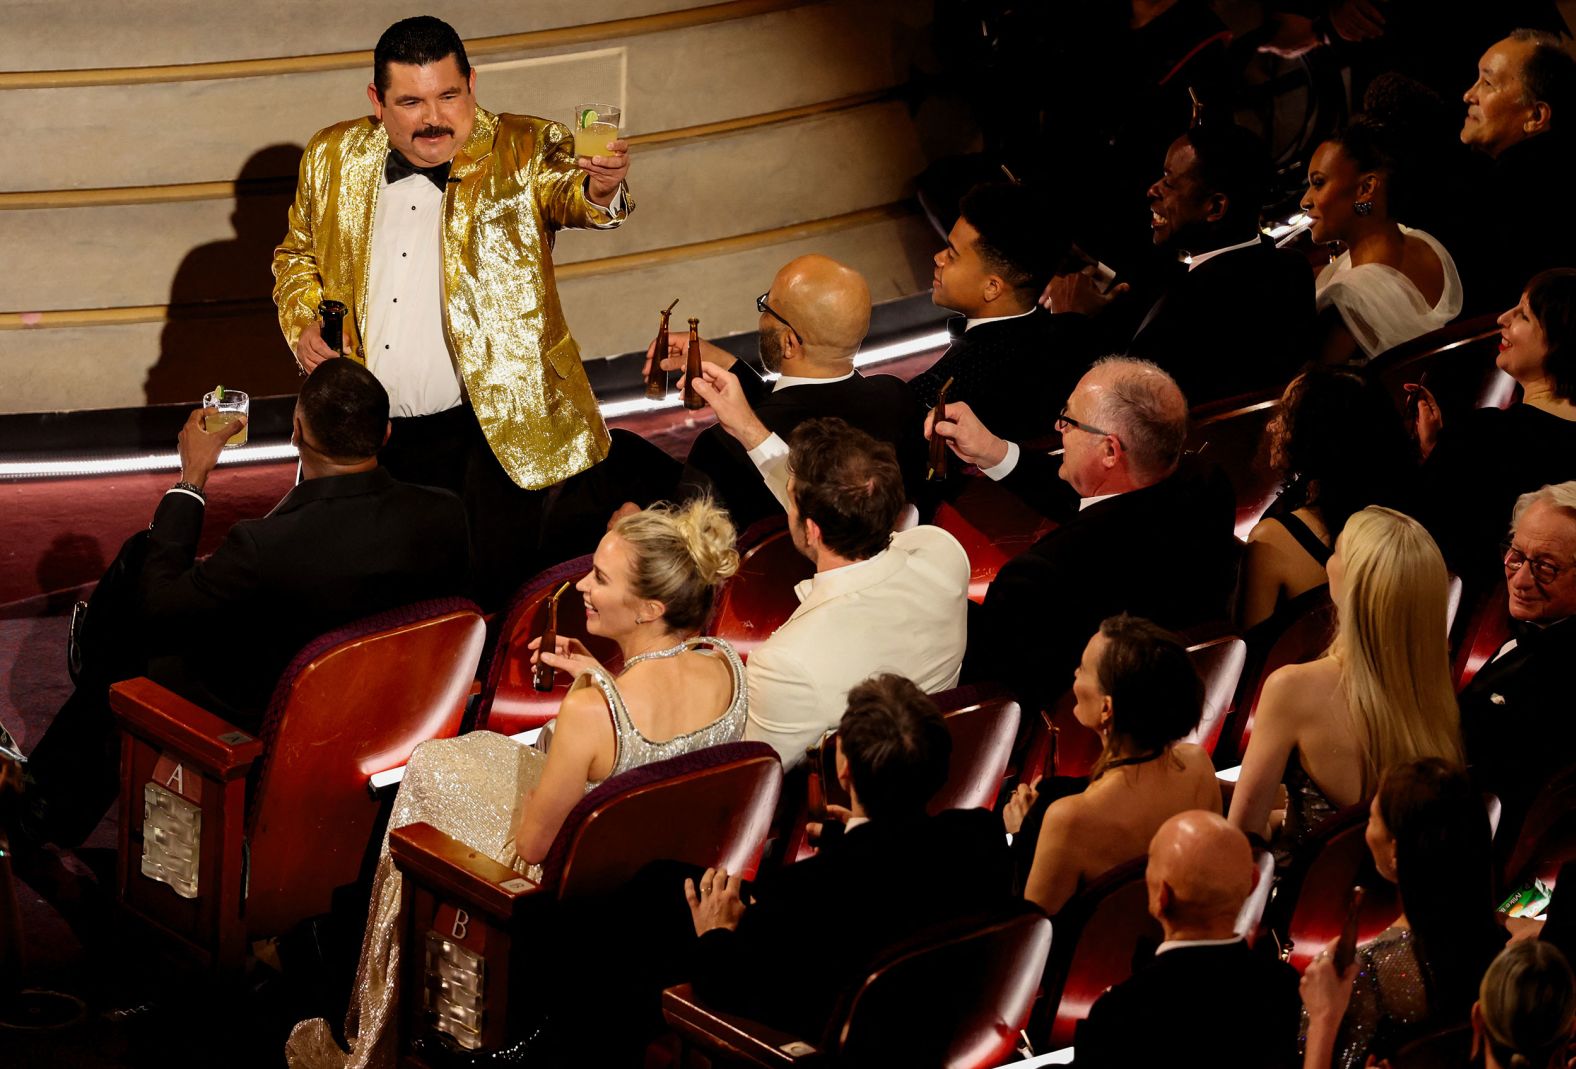 Comic Guillermo Rodriguez raises a margarita and <a href="index.php?page=&url=https%3A%2F%2Fwww.cnn.com%2Fentertainment%2Flive-news%2Foscars-academy-awards-03-10-24%2Fh_7cb30b220d8b5ce362cf685867554d76" target="_blank">threatens to toast everyone in the audience</a> during the show. He thanked "his wife" Charlize Theron (not his wife), who appeared shocked when he mentioned her.